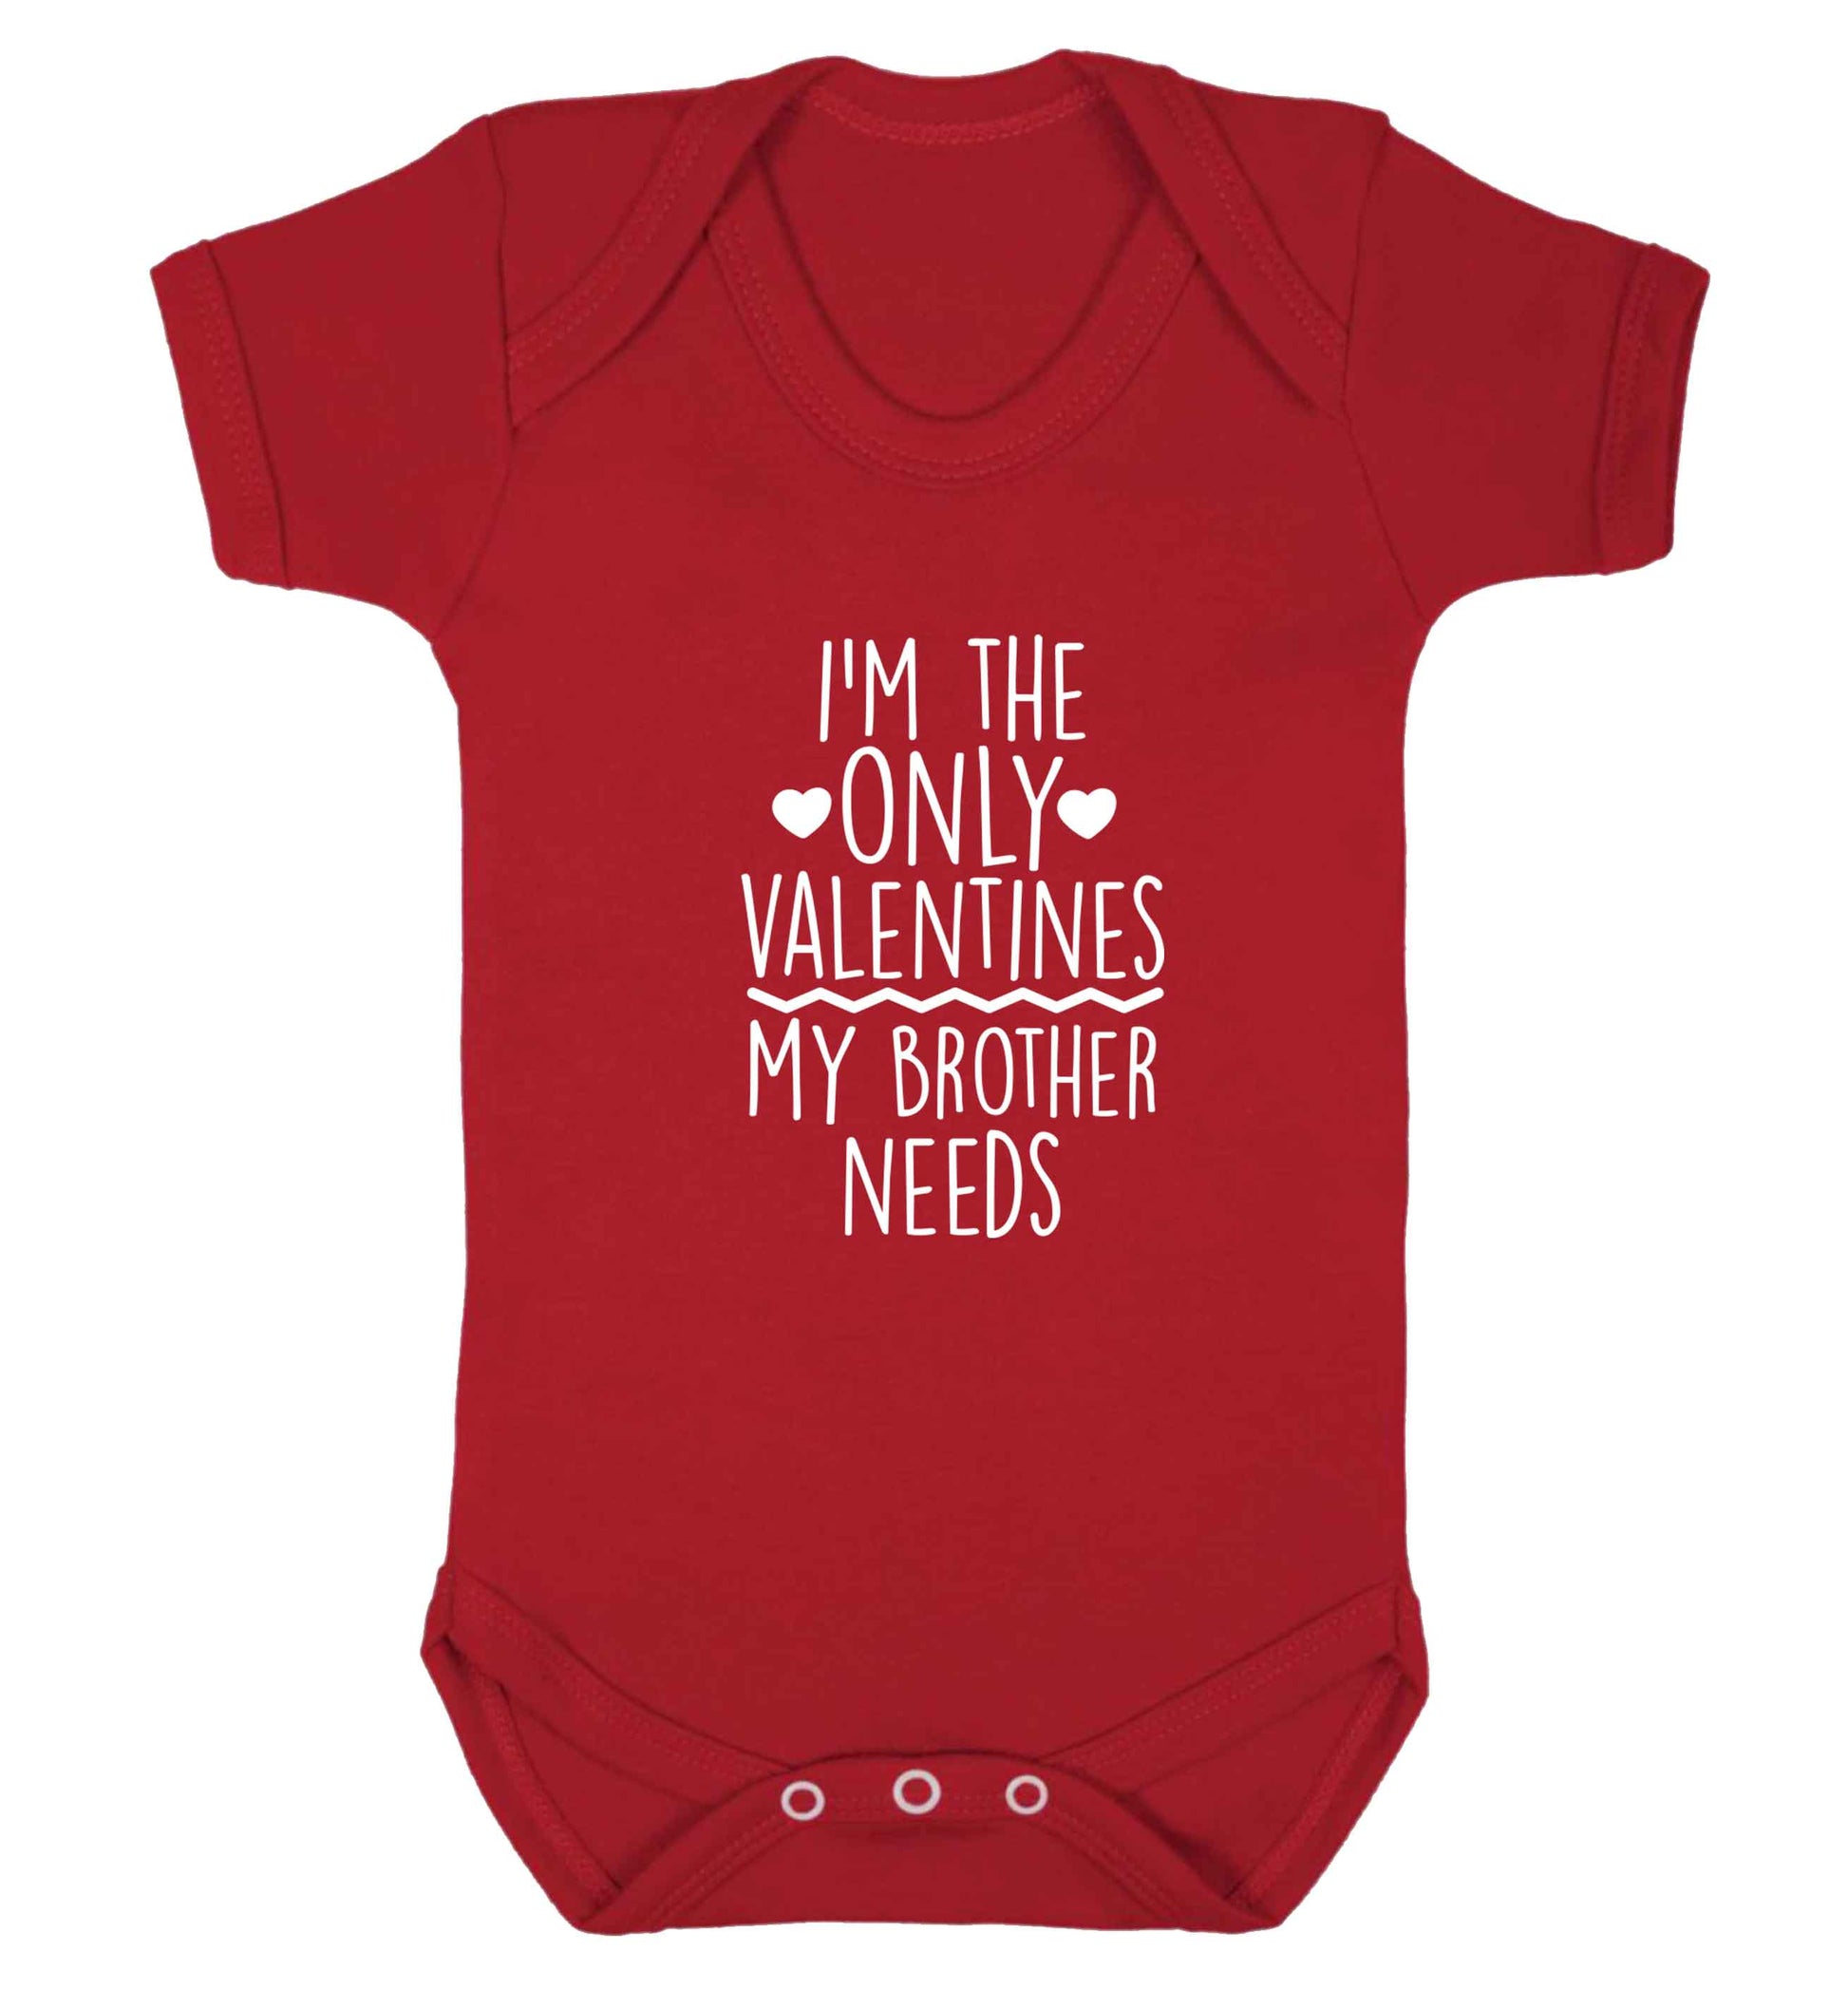 I'm the only valentines my brother needs baby vest red 18-24 months